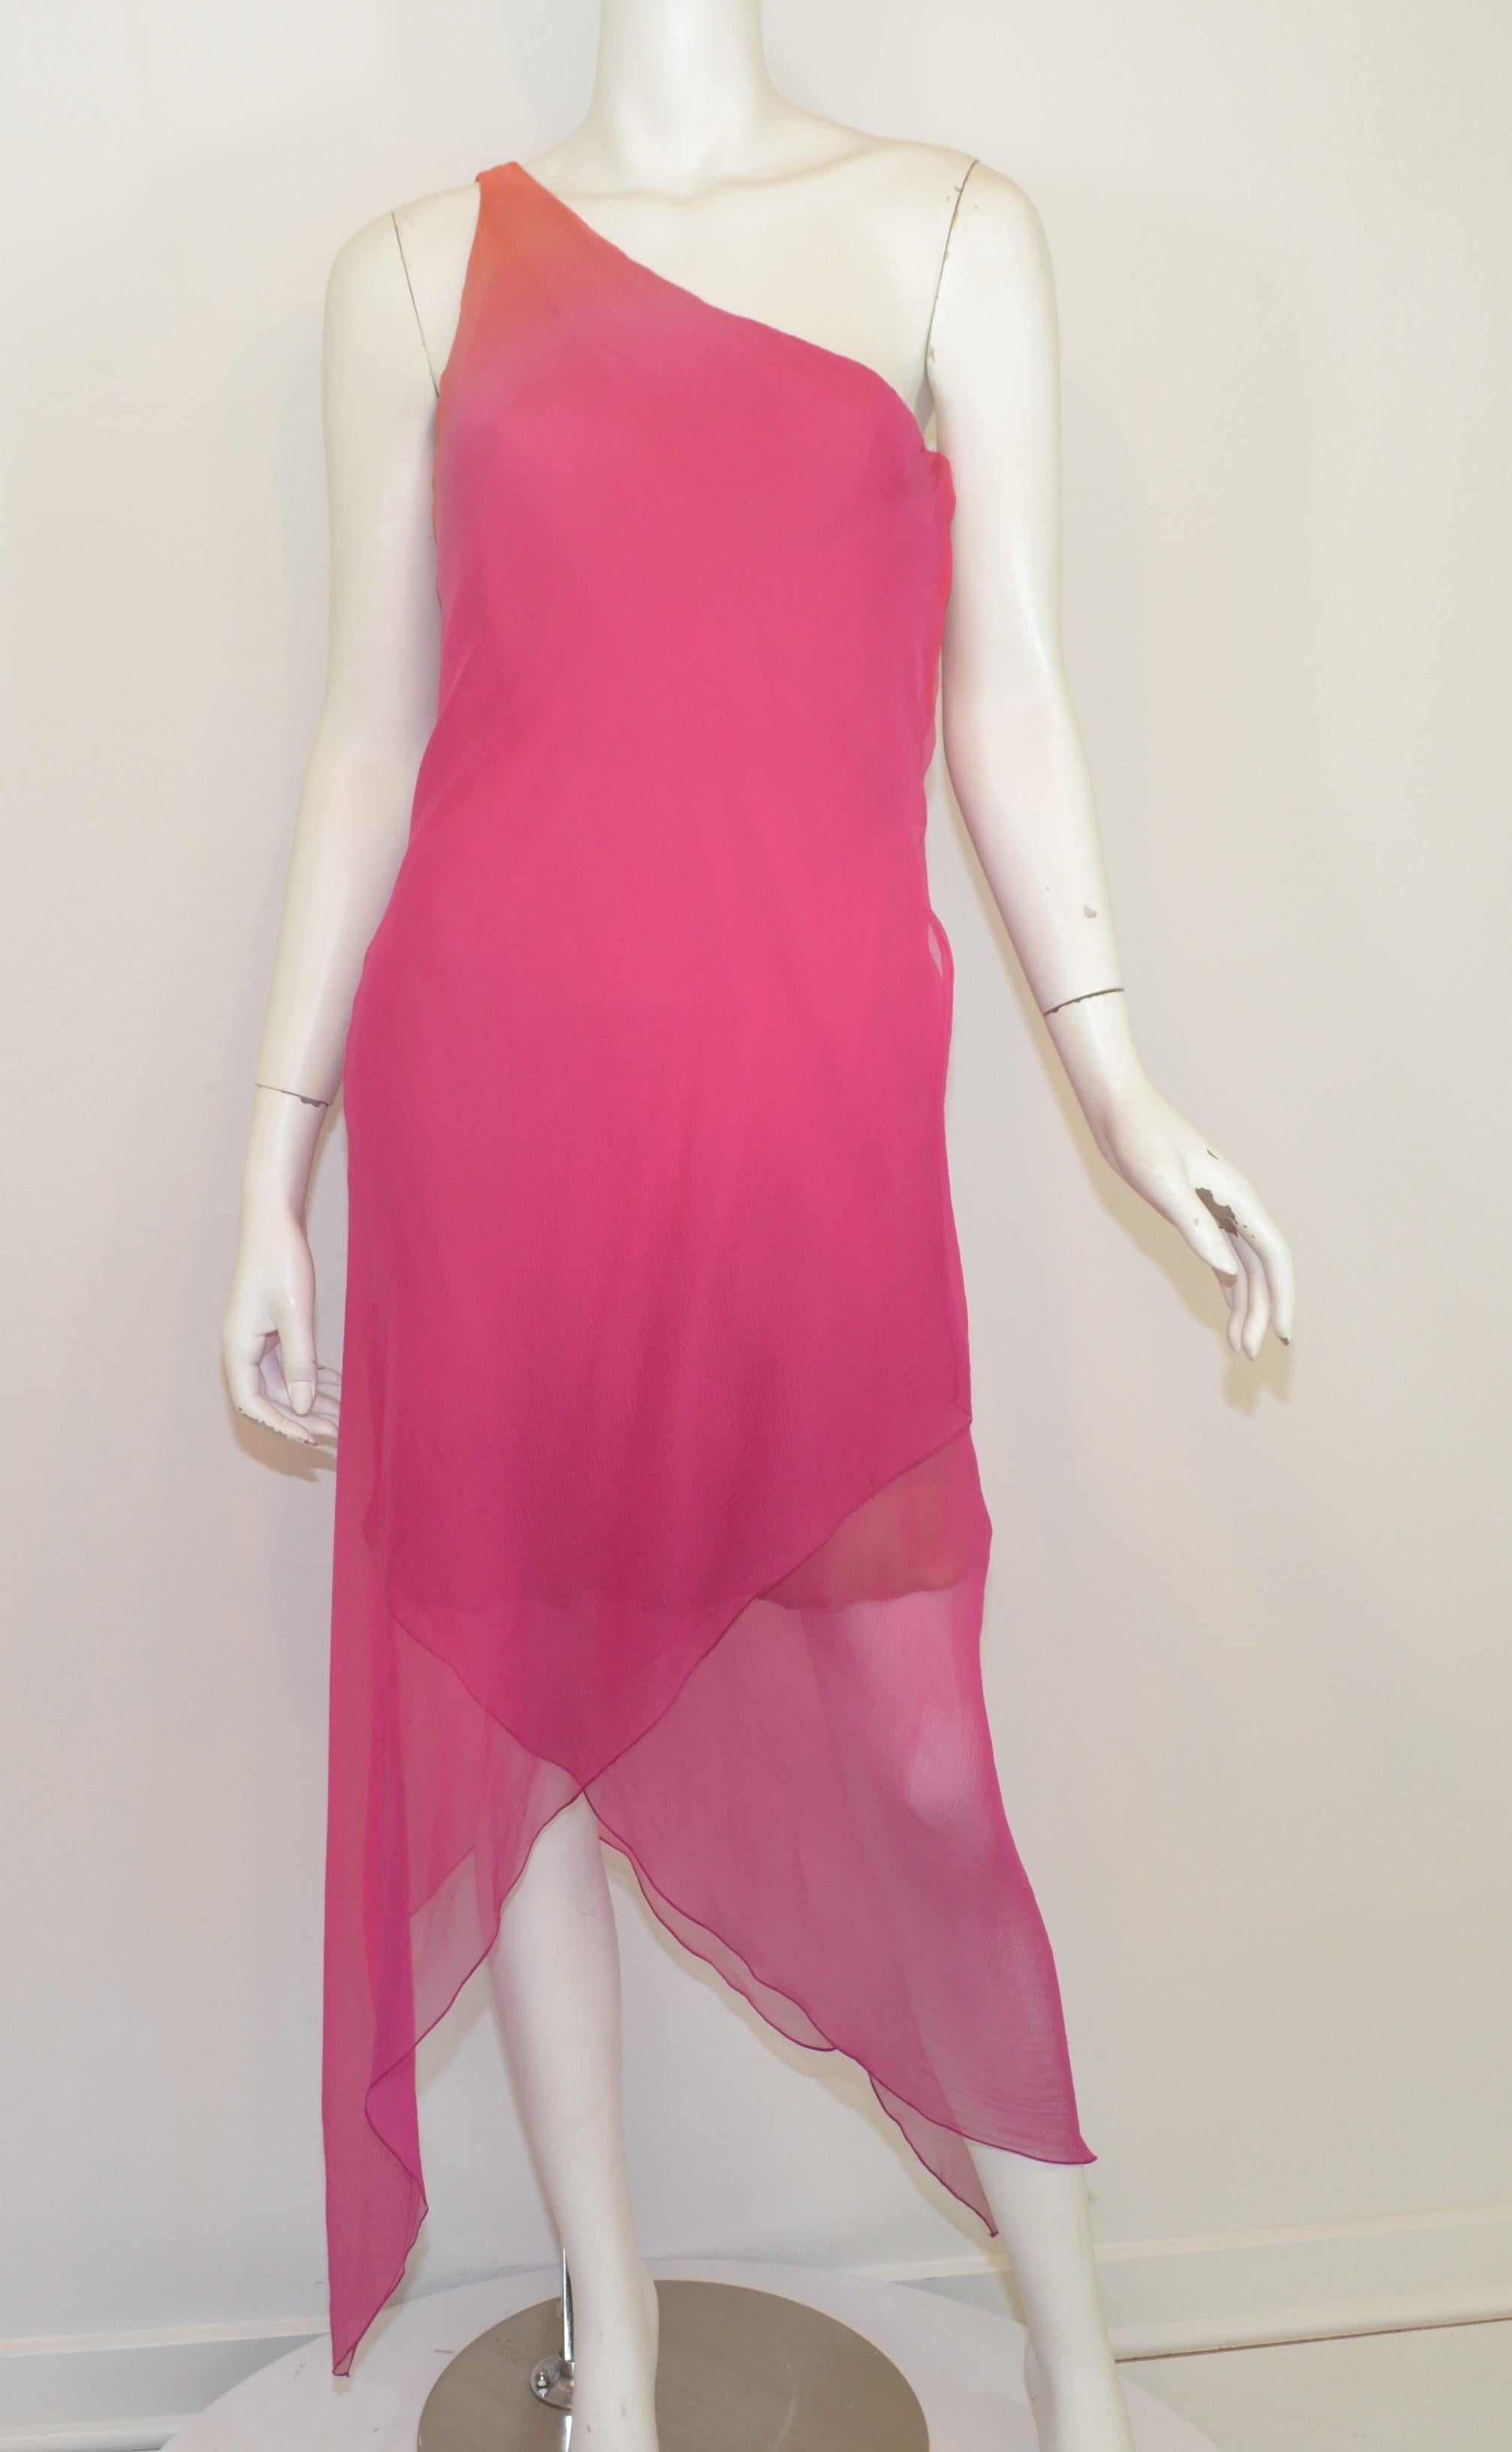 Oscar de la Renta dress features an ombre color scheme with a one-shoulder design. Dress is composed with silk chiffon, has a boned bust/waist, side zipper and snap button fastening, asymmetric hem, and double silk chiffon lining. Dress is in great